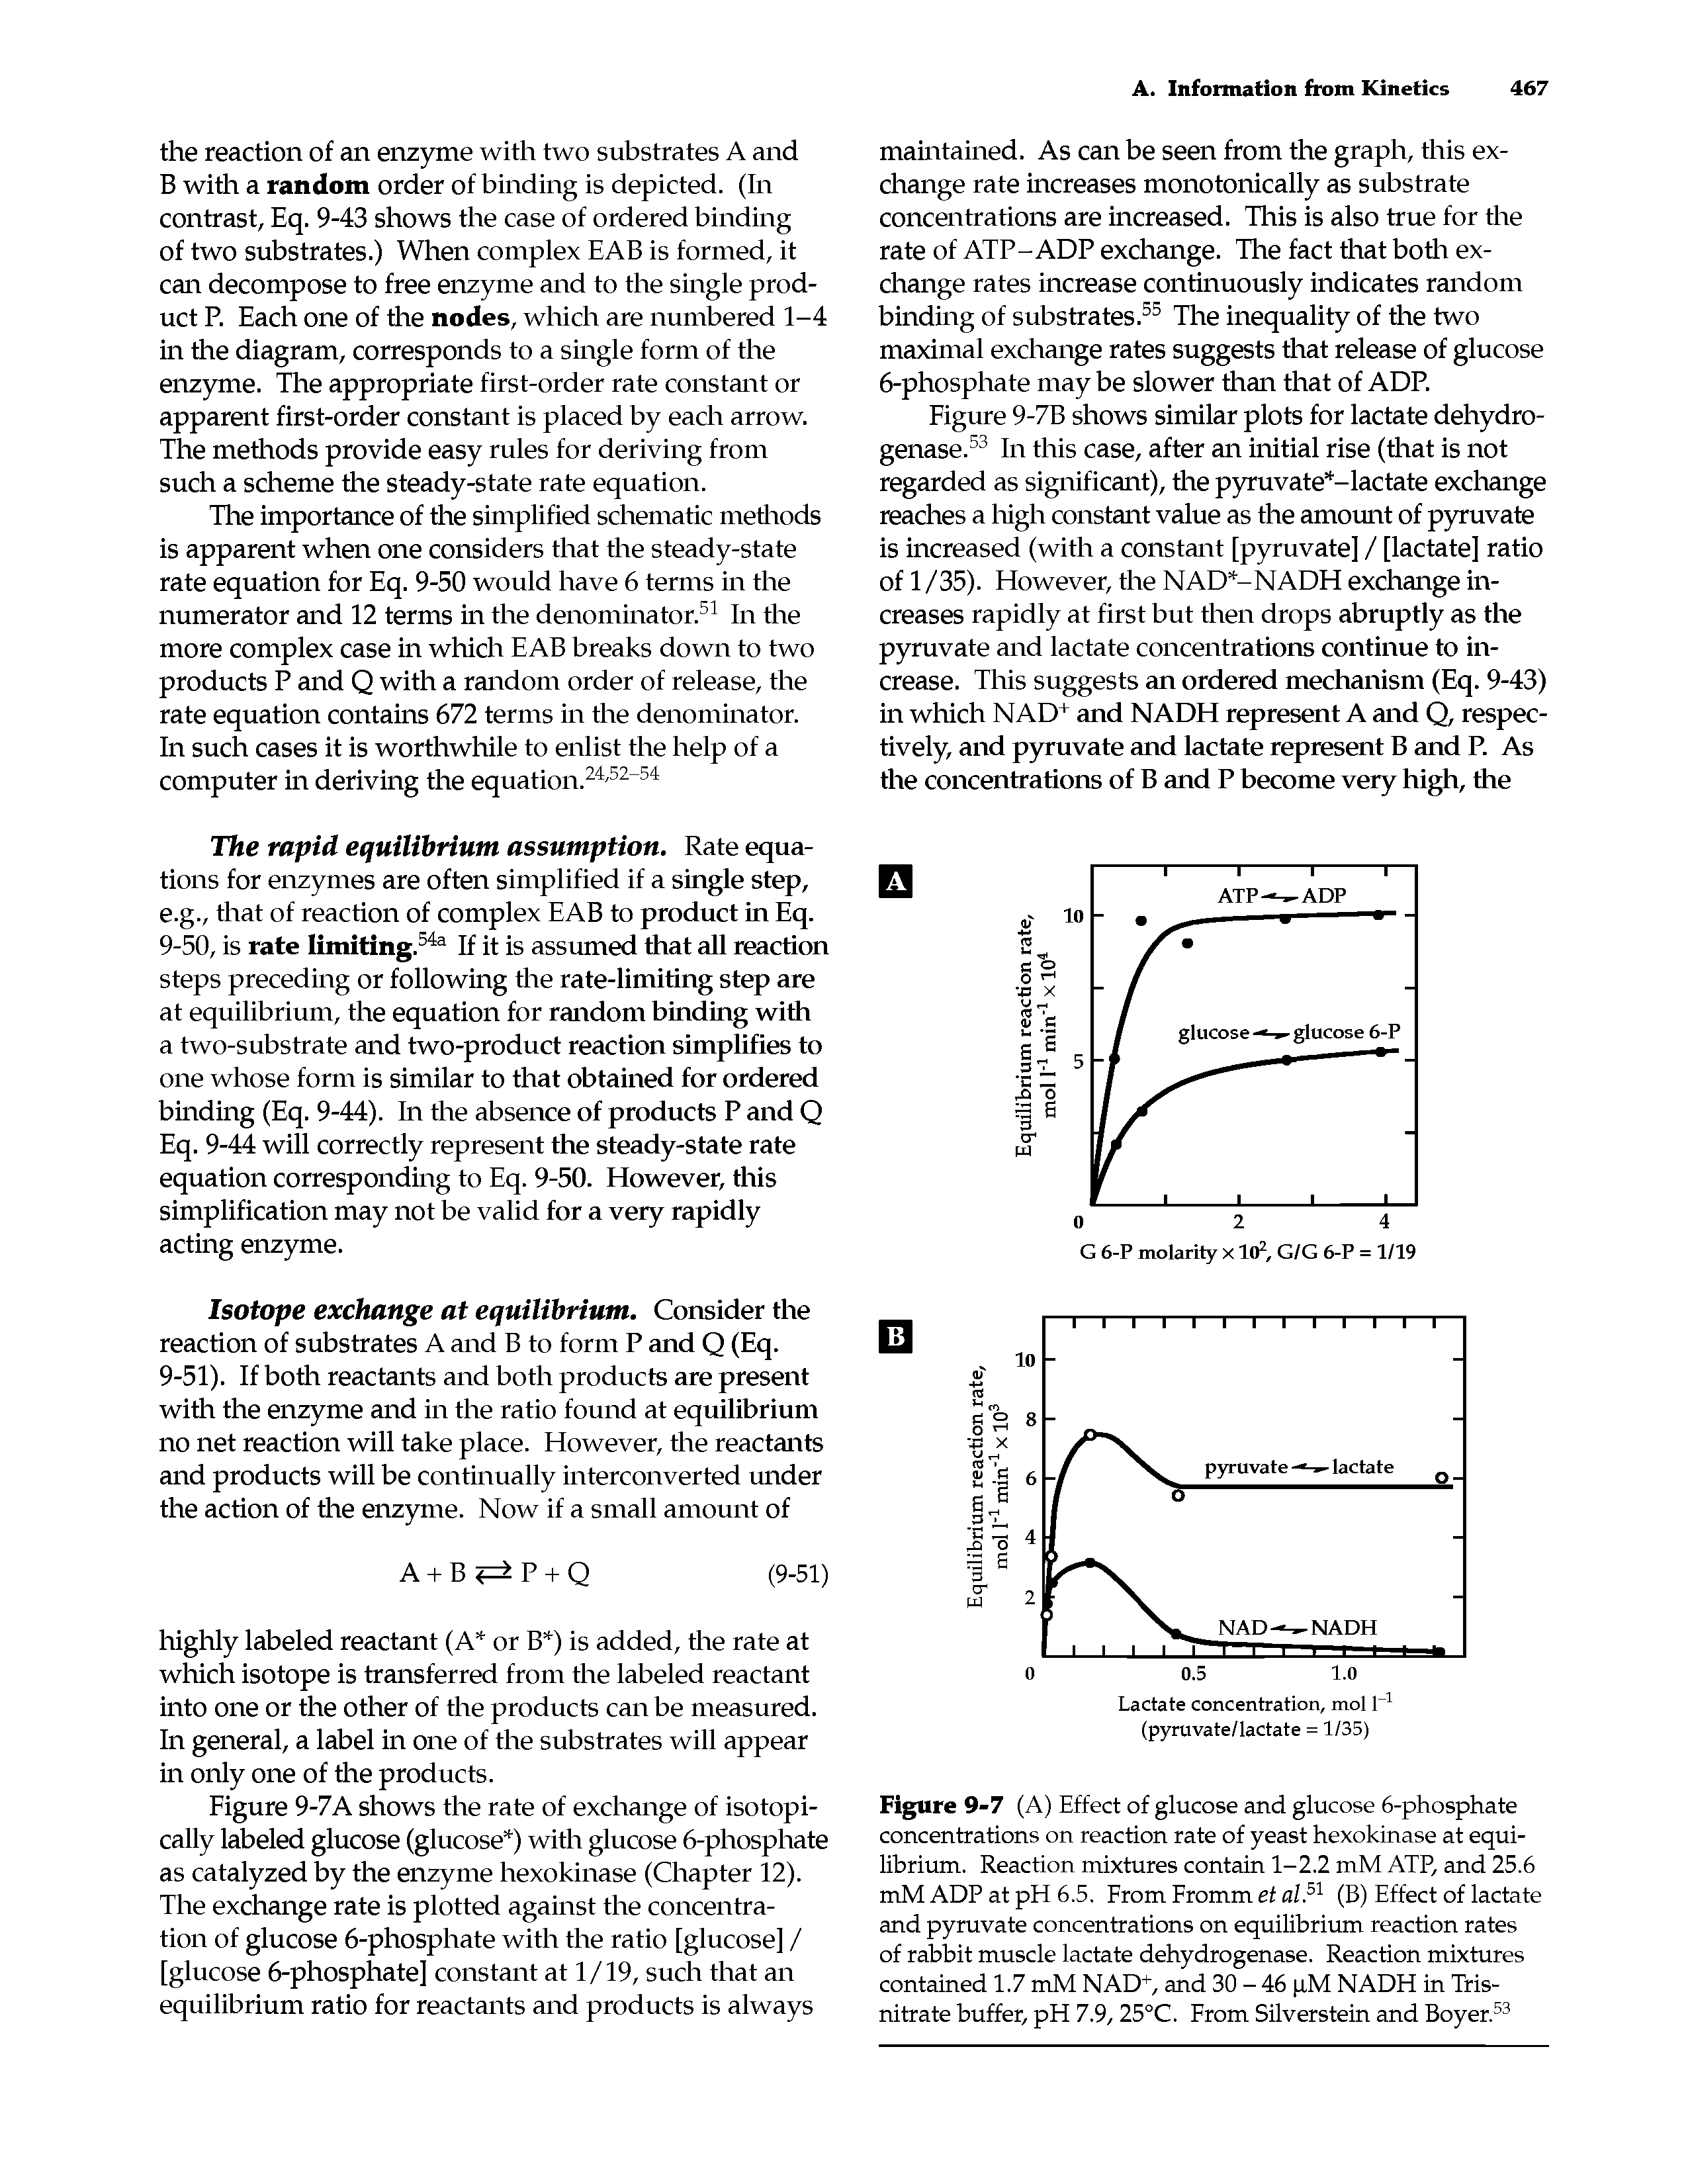 Figure 9-7 (A) Effect of glucose and glucose 6-phosphate concentrations on reaction rate of yeast hexokinase at equilibrium. Reaction mixtures contain 1-2.2 mM ATP, and 25.6 mM ADP at pH 6.5. From Fromm et al.51 (B) Effect of lactate and pyruvate concentrations on equilibrium reaction rates of rabbit muscle lactate dehydrogenase. Reaction mixtures contained 1.7 mM NAD+, and 30 - 46 pM NADH in Tris-nitrate buffer, pH 7.9, 25°C. From Silverstein and Boyer.53...